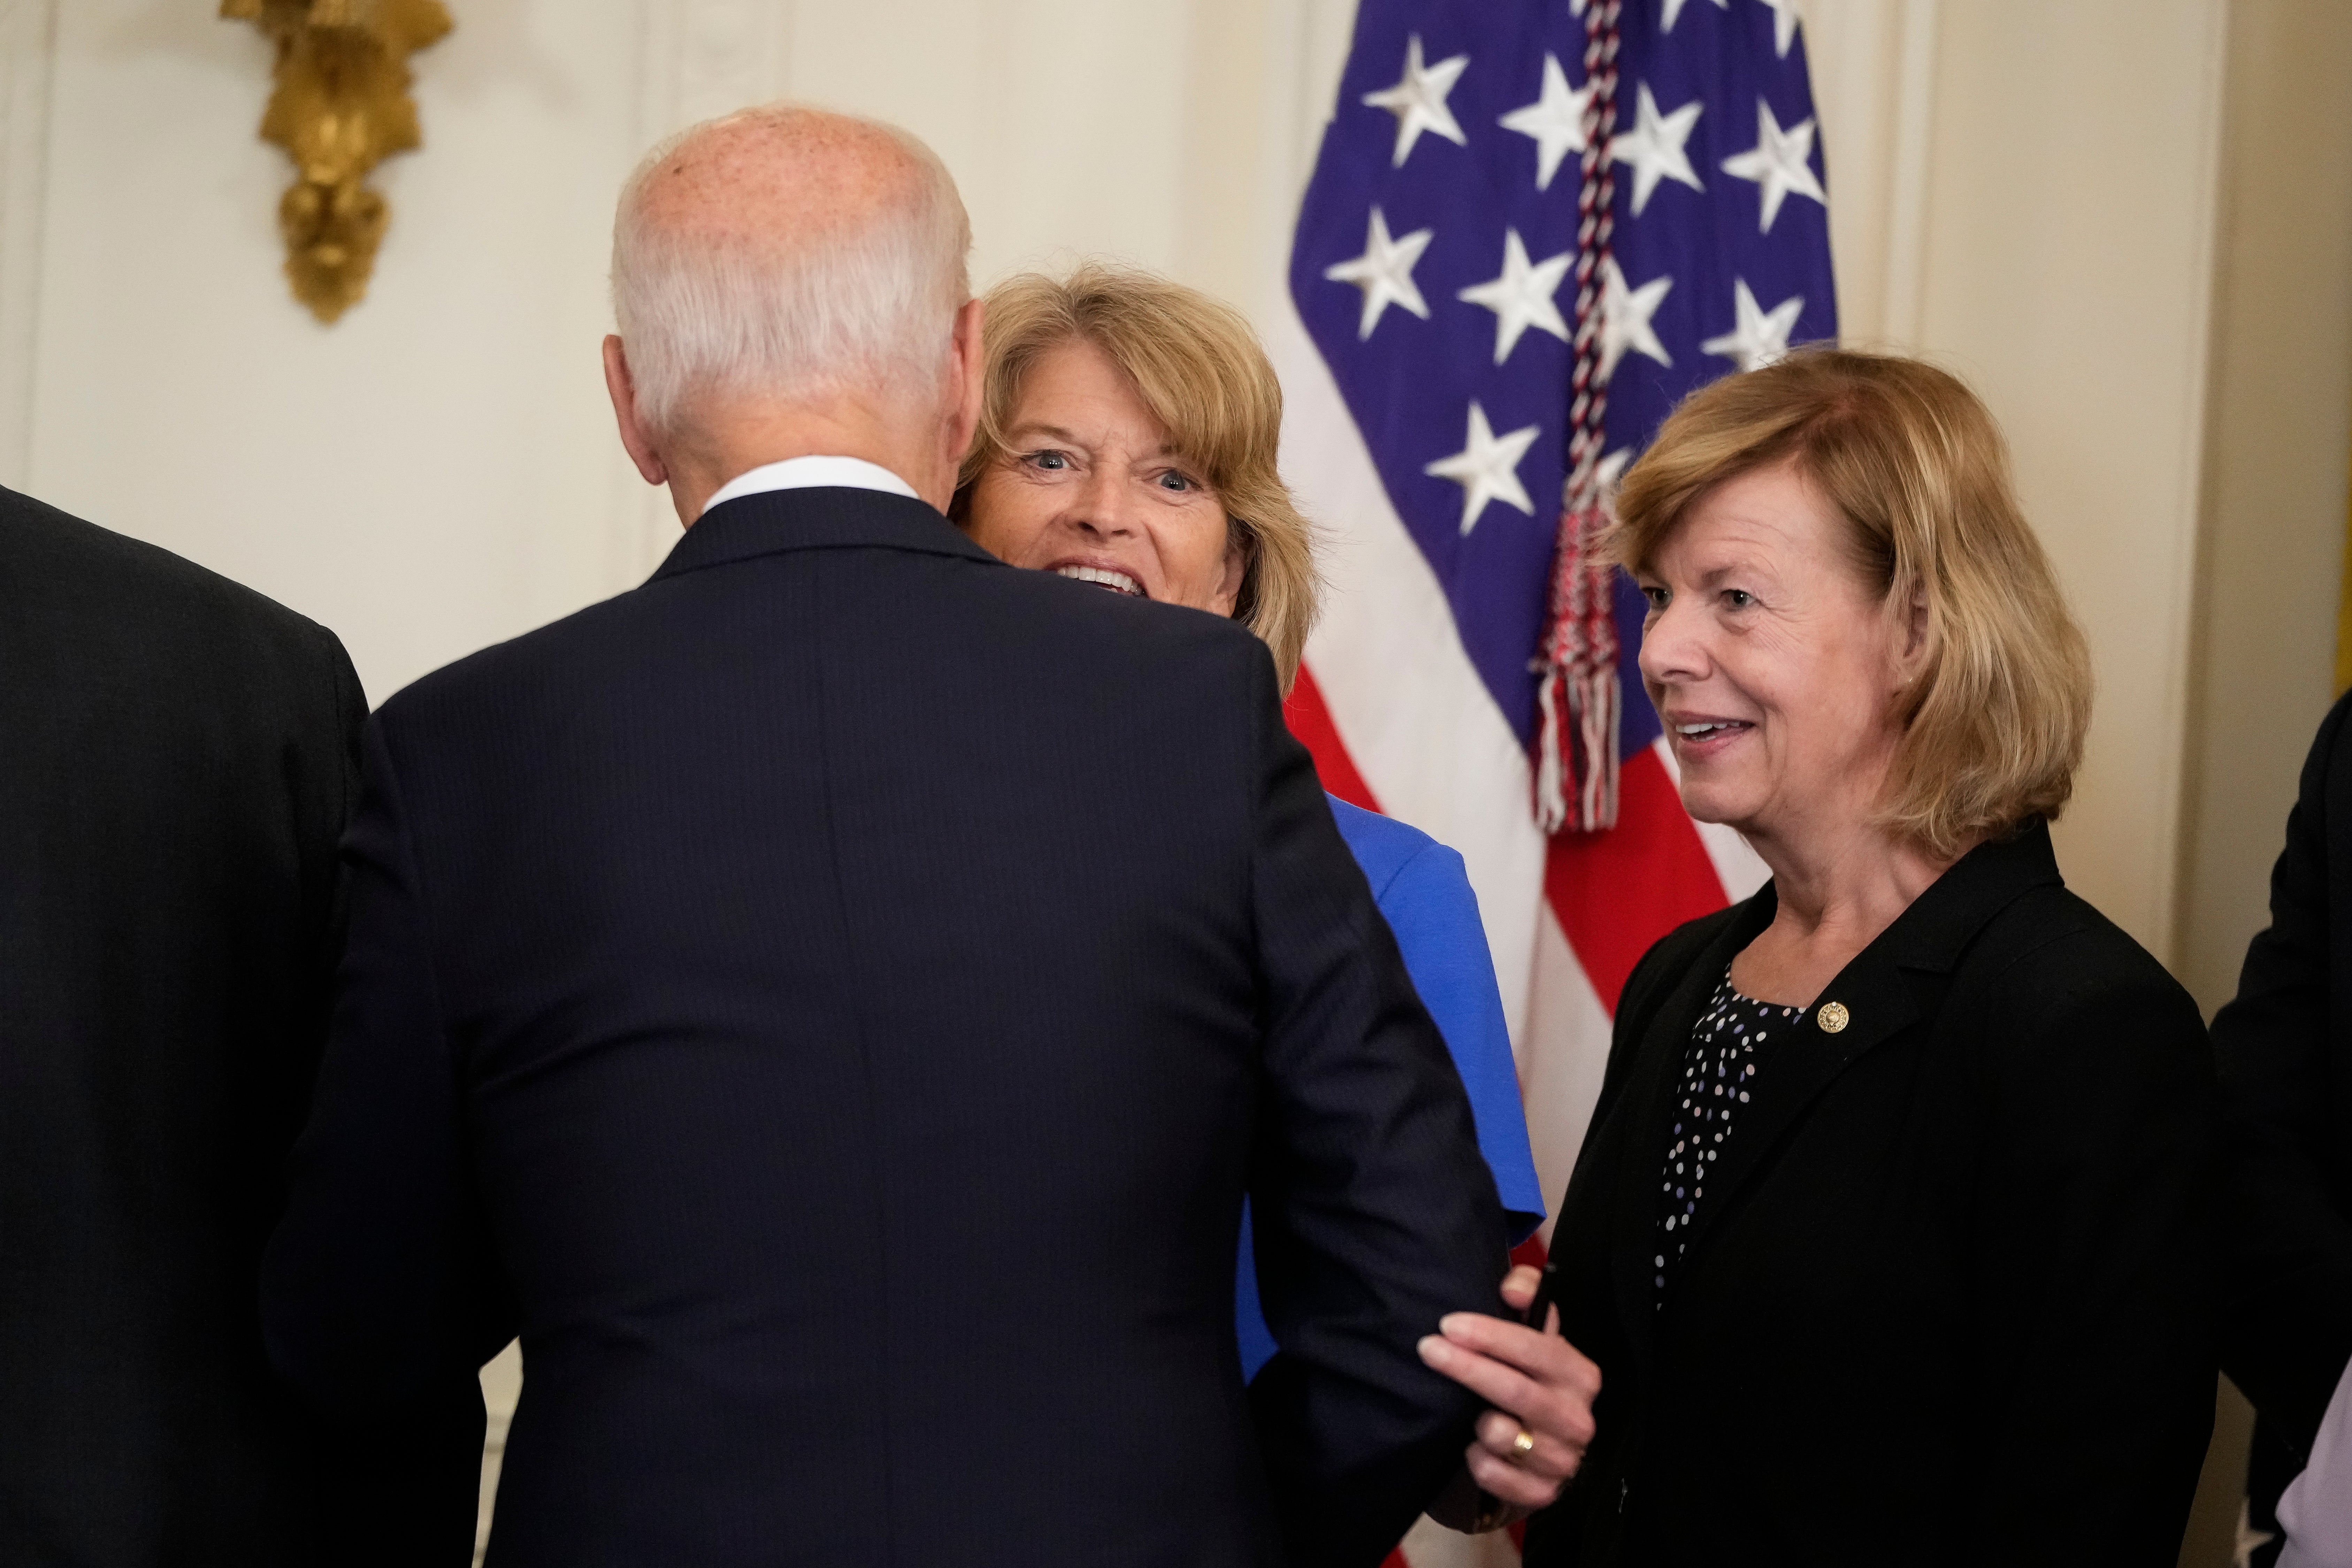 Despite President Joe Biden’s unpopularity Sen. Tammy Baldwin (D-WI) has not sustained much damage to her public polling as she seeks re-election. (Photo by Drew Angerer/Getty Images)